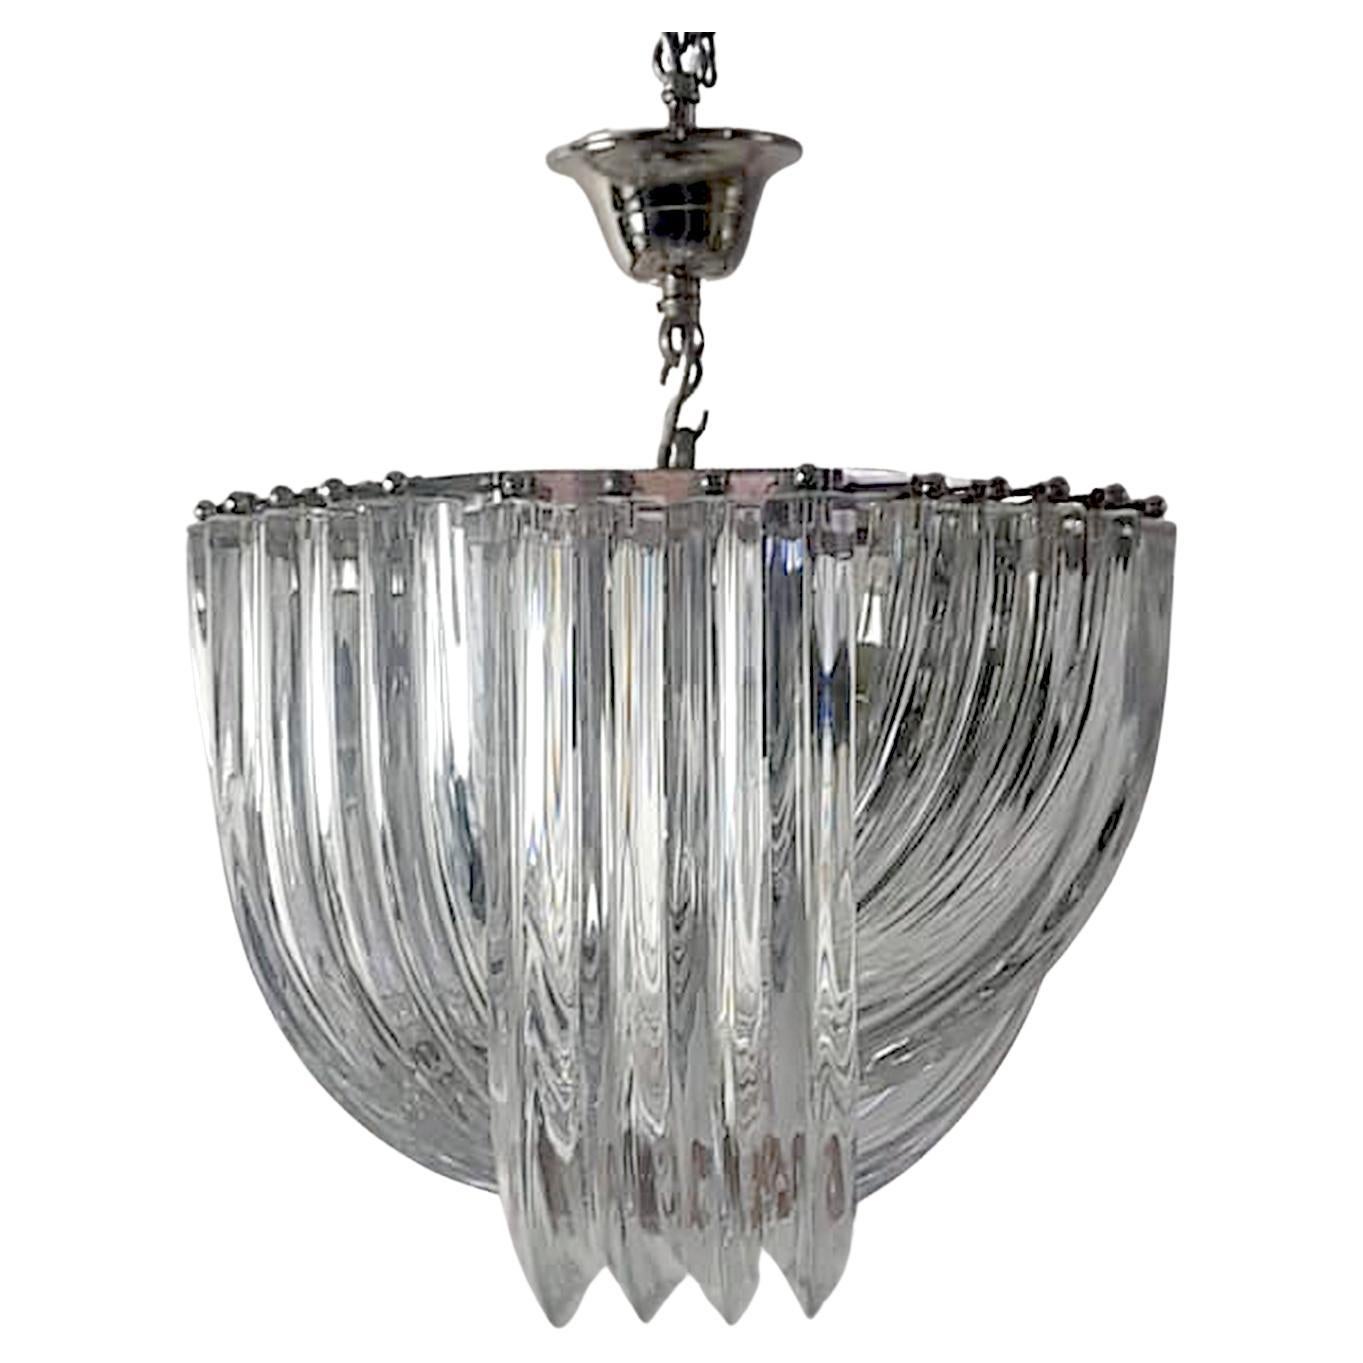 
Add a touch of classic Italian craftsmanship to your home with this stunning Venini chandelier from the 1960s. The octagonal shape and chrome structure perfectly complement the four layers of curved, handmade Triedri clear Murano glass.

Expertly